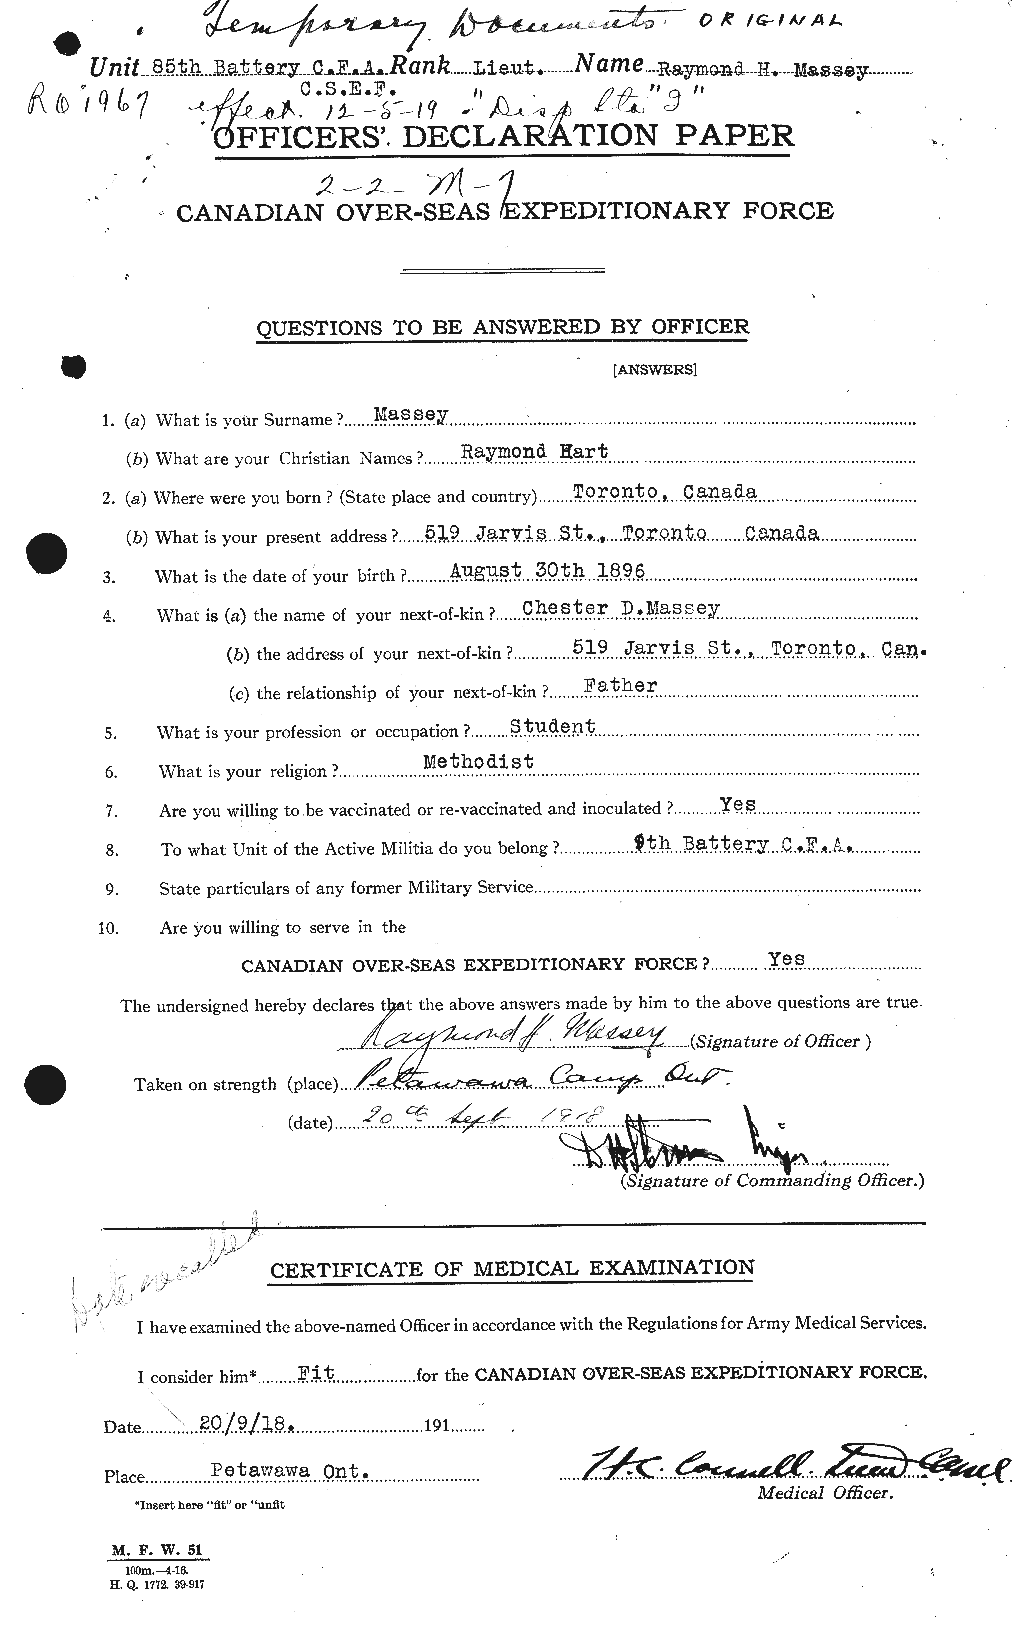 Personnel Records of the First World War - CEF 487095a